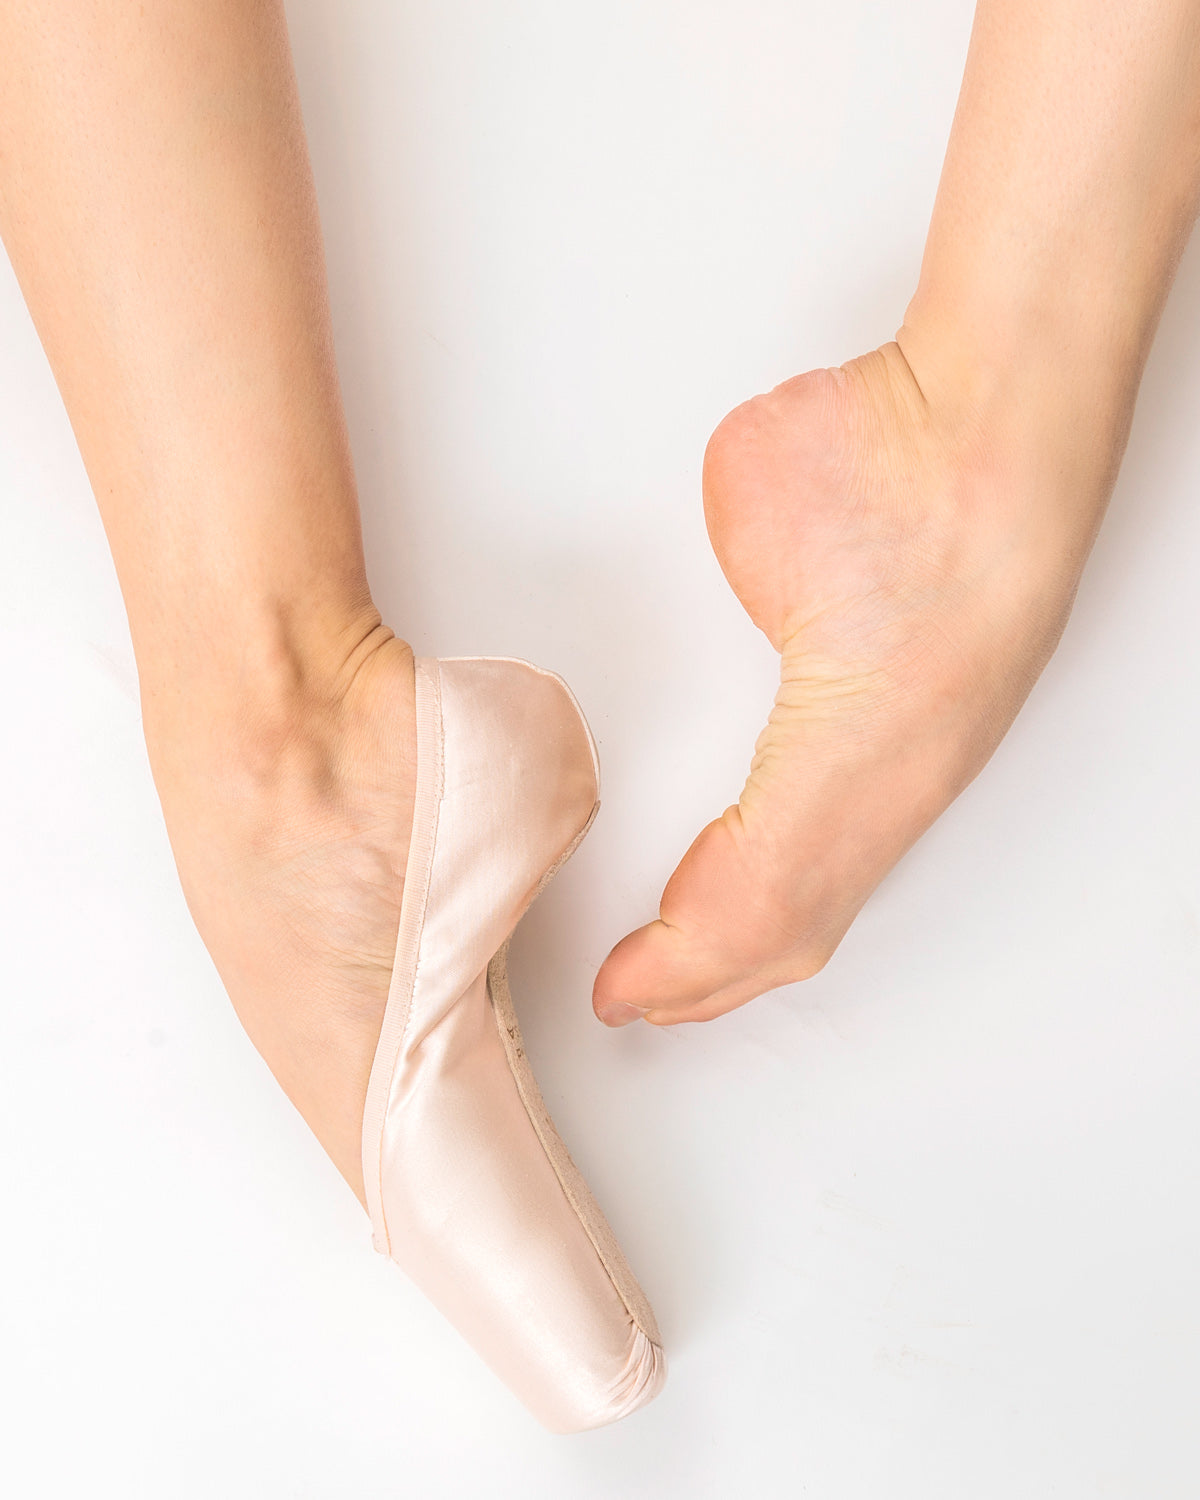 DANCE FOOT PROTECTION IN 3 EASY STEPS